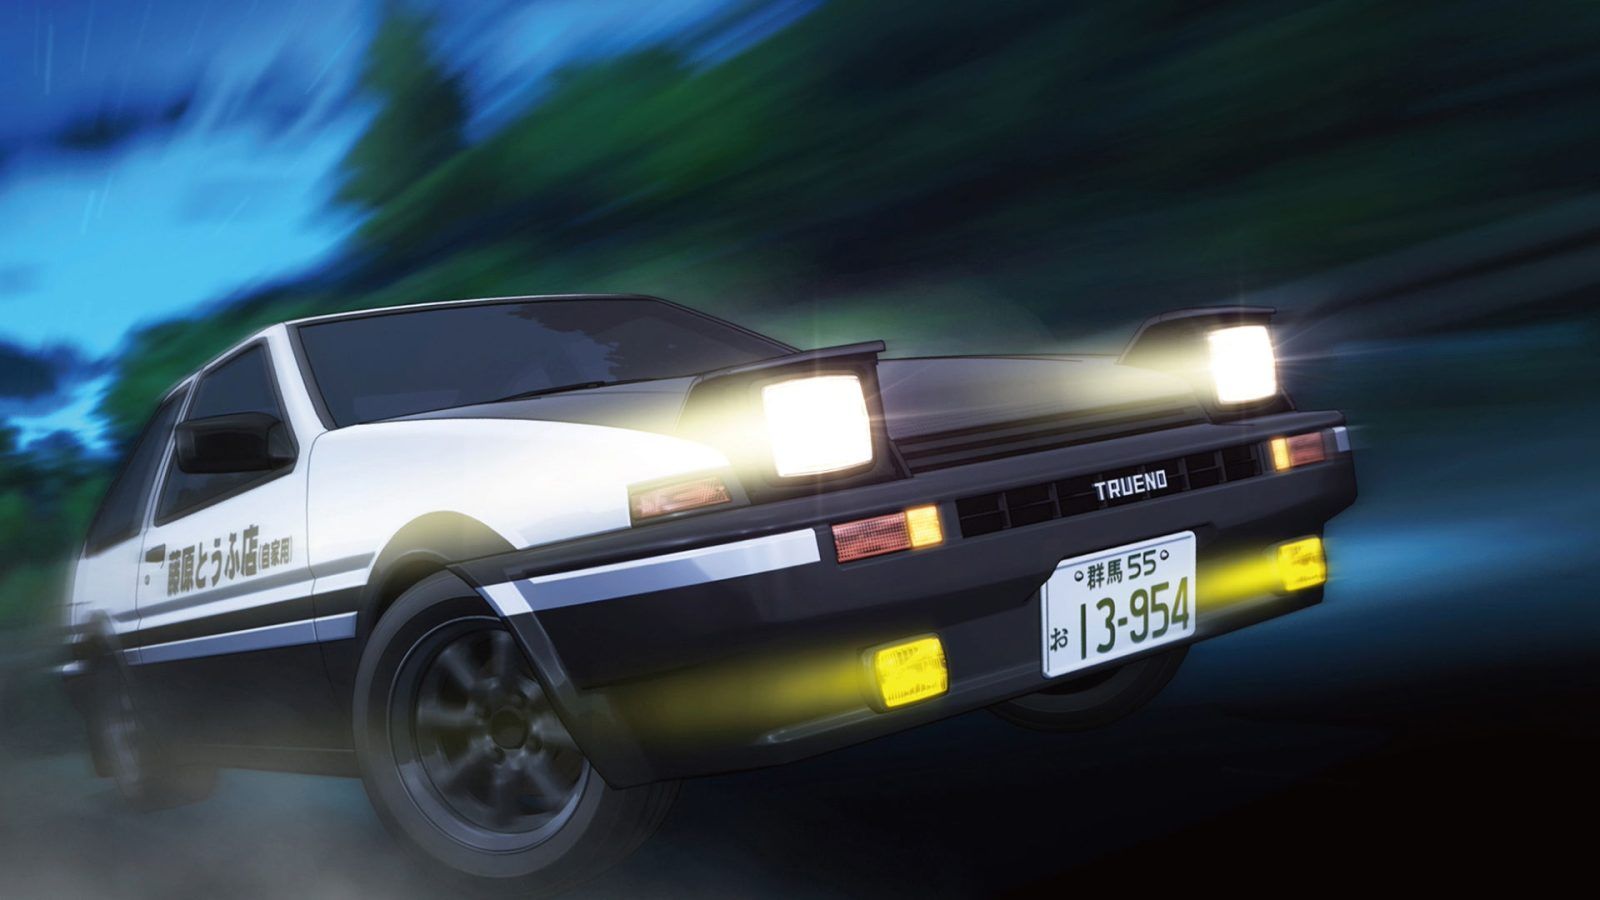 Initial D Successor Manga MF Ghost Briefly Listed With 2023 TV Anime - News  - Anime News Network